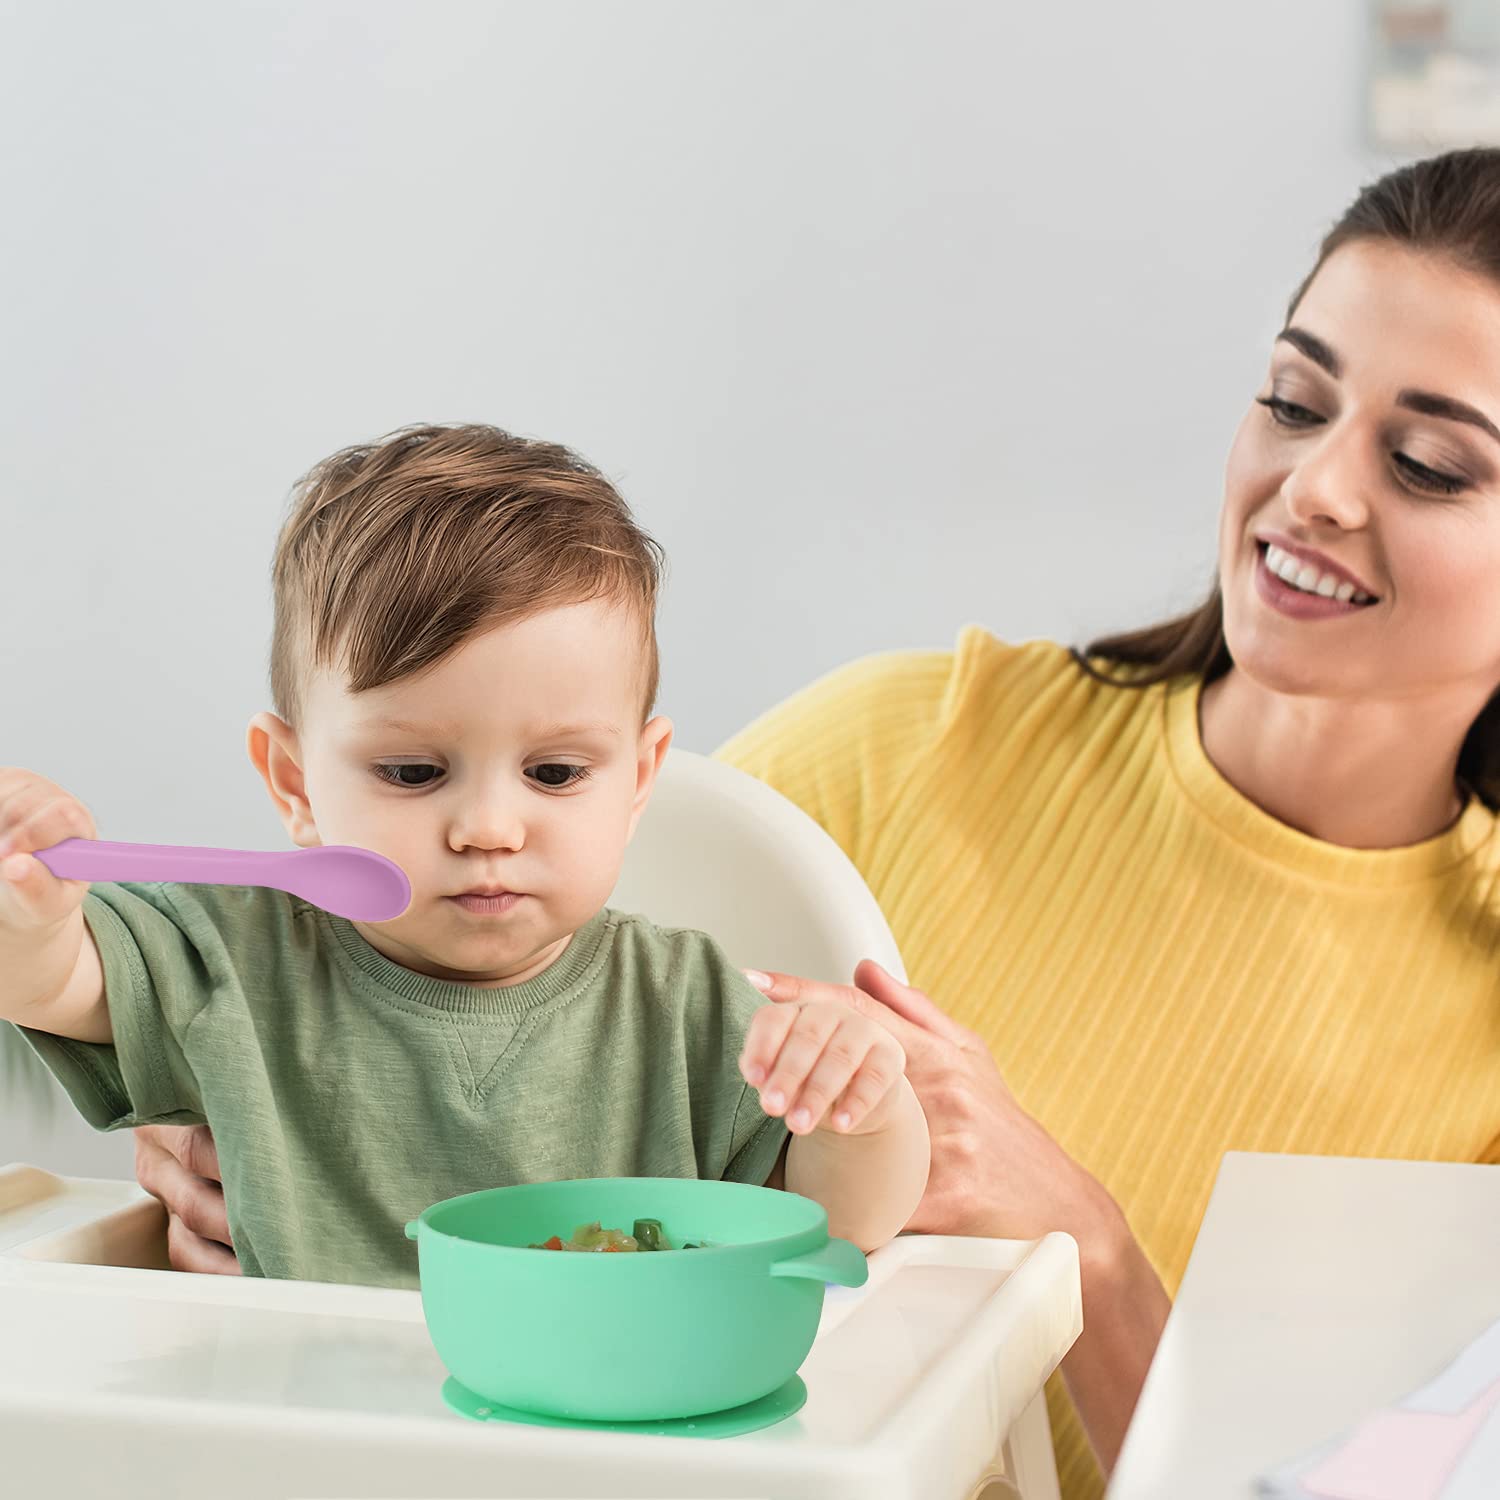 What is the Best Baby Spoon for Infants for introducing Solid Foods? 